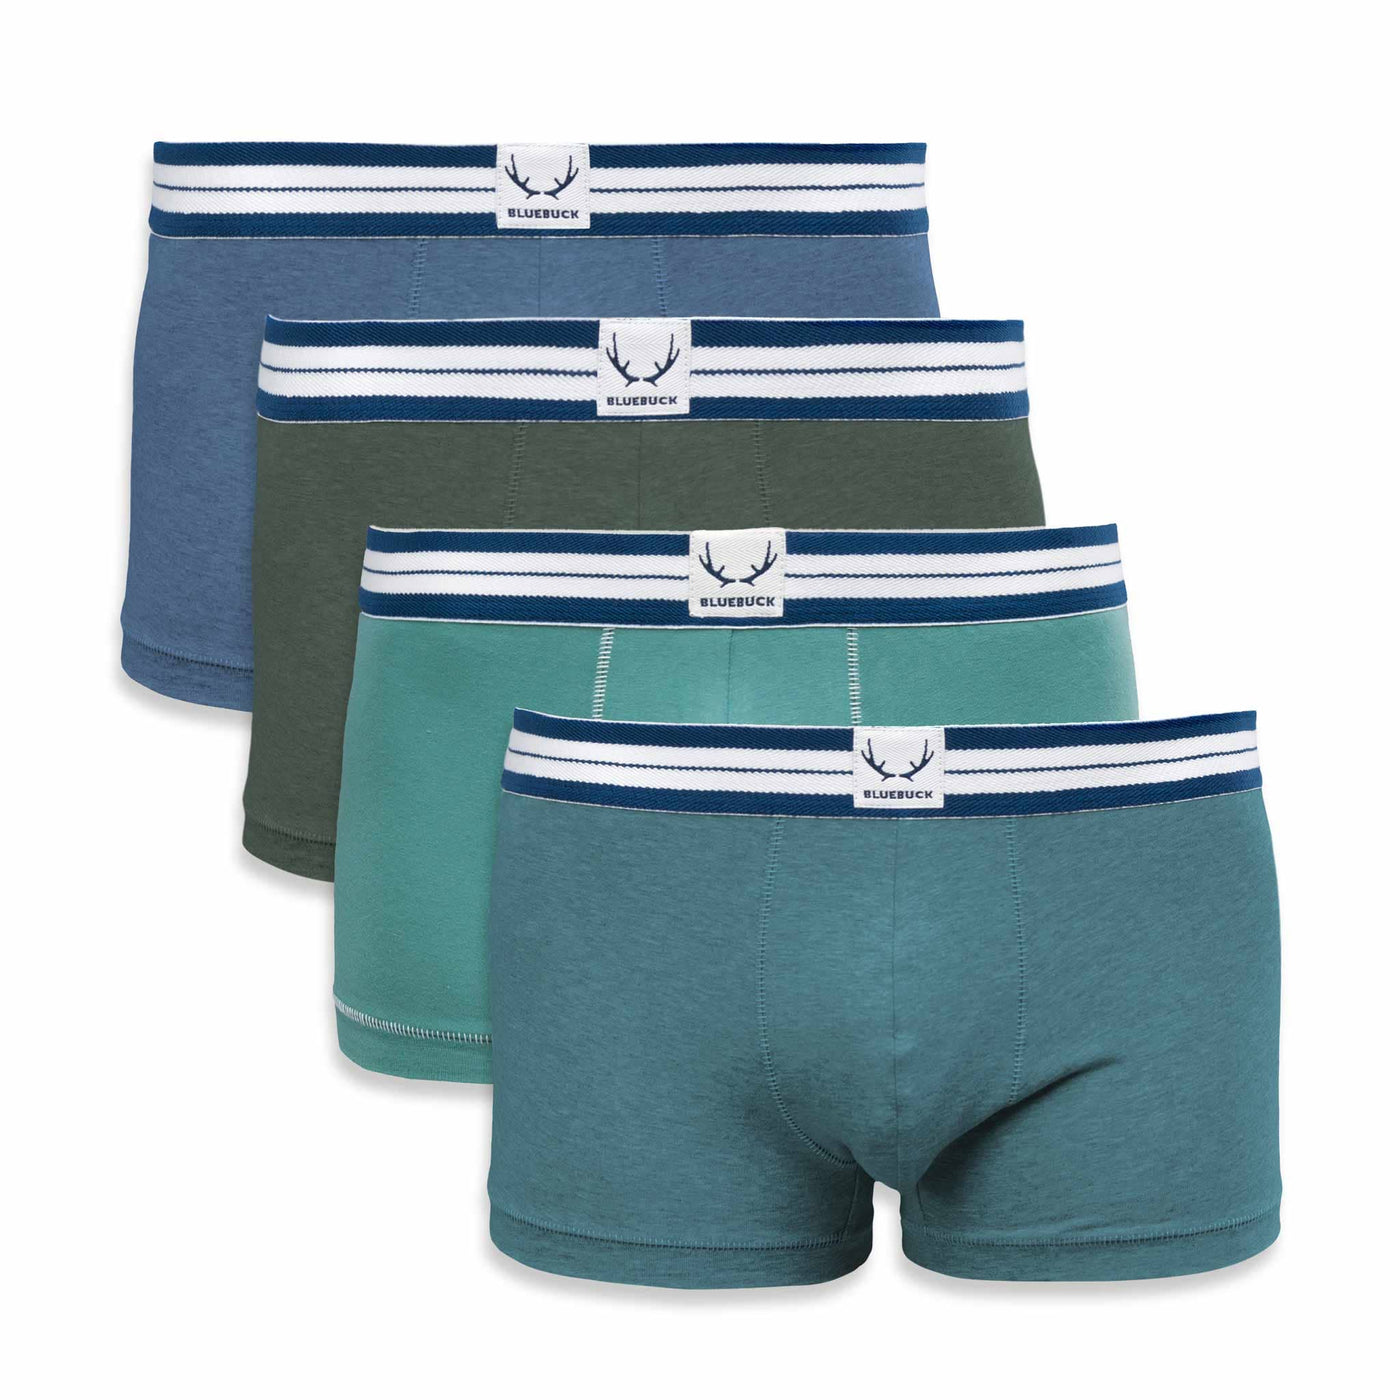 4 classic blue and green organic cotton trunks